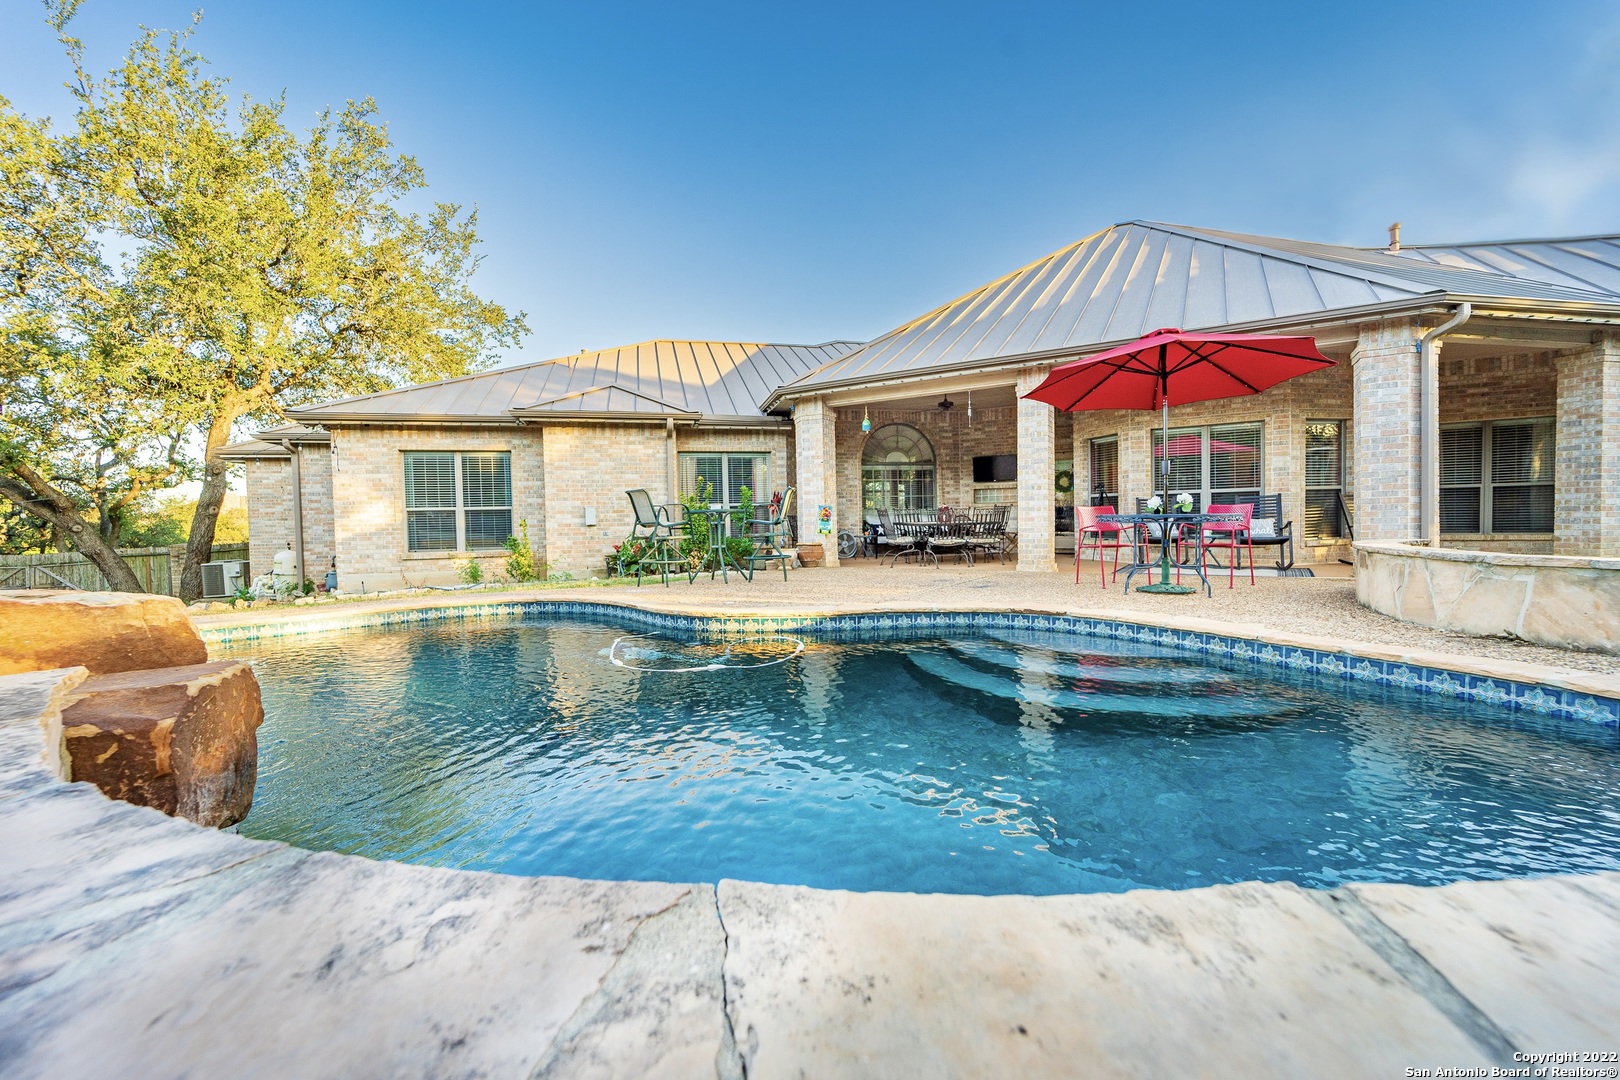 Splish! Splash! OPEN HOUSE SAT 7/9/22 1-3PM **Sprawling Single Story on Over An Acre!**Corner Lot provides privacy for your sparkling IN-GROUND POOL**Stunning Shavano Creek neighborhood is close to I-10, Medical Center, USAA**FIVE BR/3.5 baths PLUS Study/Office and Game Room**UPGRADED Kitchen features WHITE custom Cabinets, SS gas Appliances, Granite Countertops, Vegetable sink/Island**Opens to Huge Family Room w/ gas/rock fireplace**Private Master Suite with Trendy Bath! Grey/white Tile, Countertops, stand alone tub, Glass Shower, Custom Closet, WOW! All Secondary BR's share Jack and Jill Baths**Game Room is the only room upstairs**Entertain outside under Covered Patios**Enjoy Refreshing Pool with Rock Water Feature**3 Car Garage, Circular Driveway for guests**See it today!